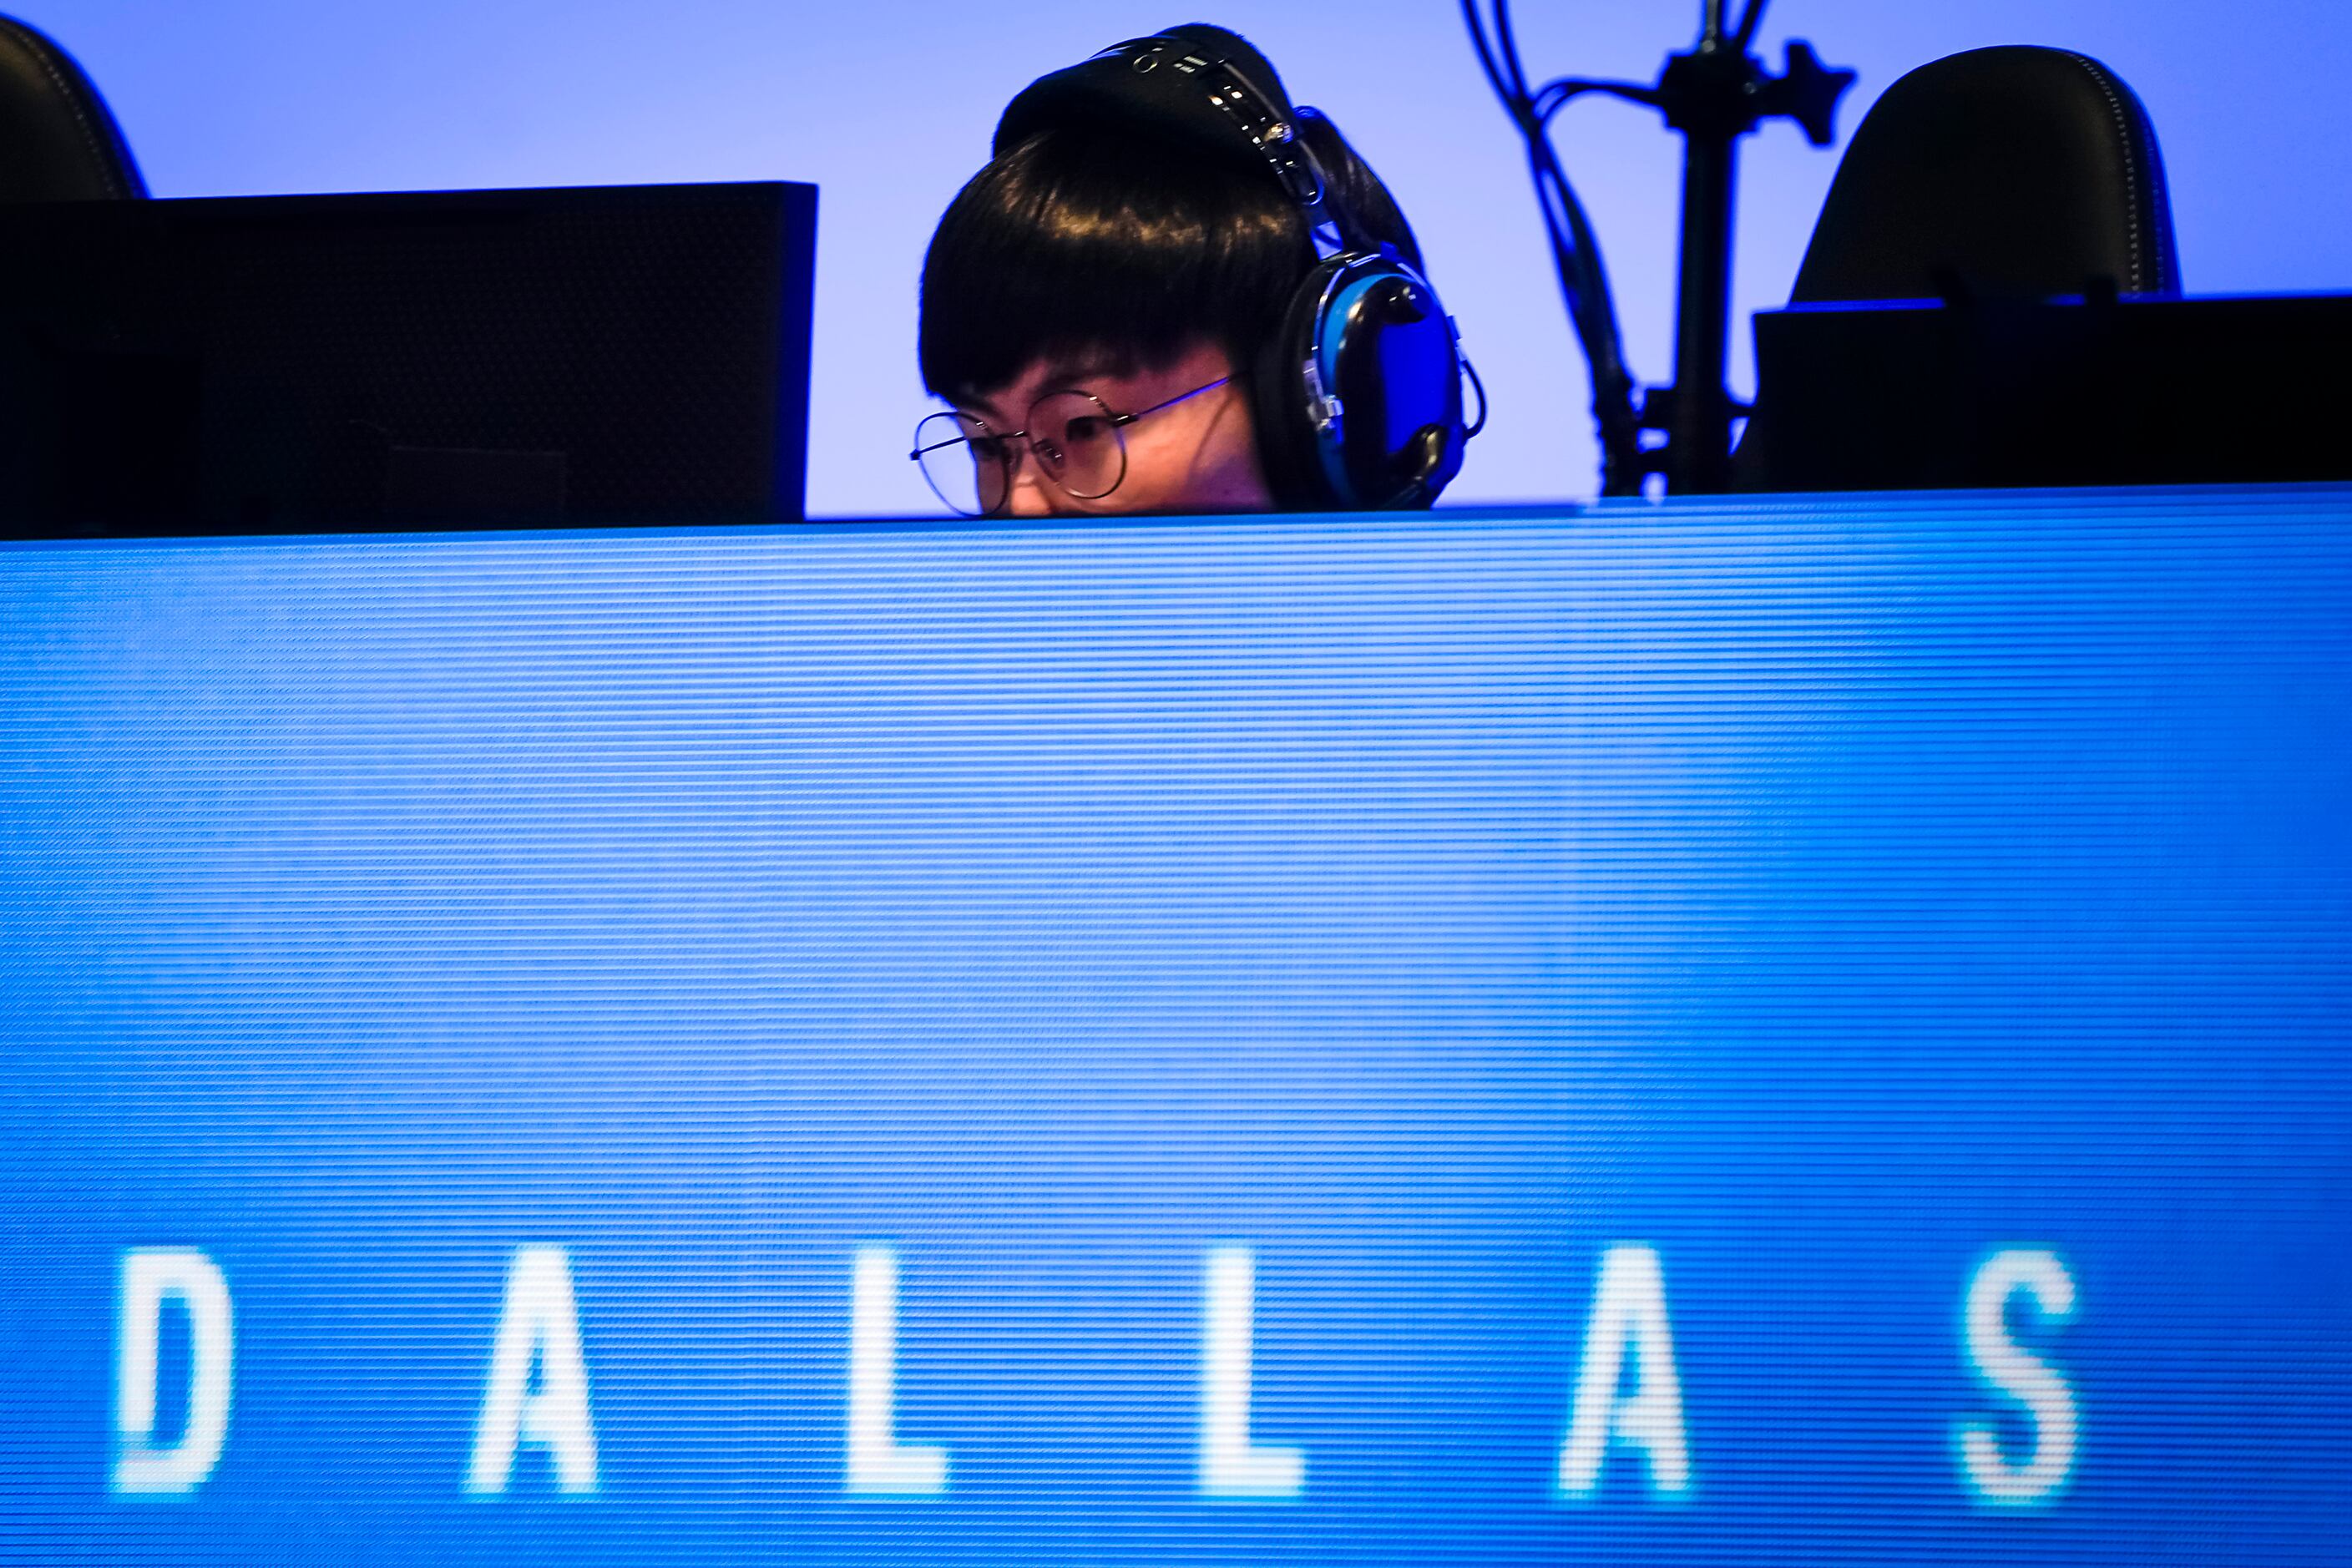 Noh "Gamsu" Youngjin of the Dallas Fuel competes in an Overwatch League match against the...